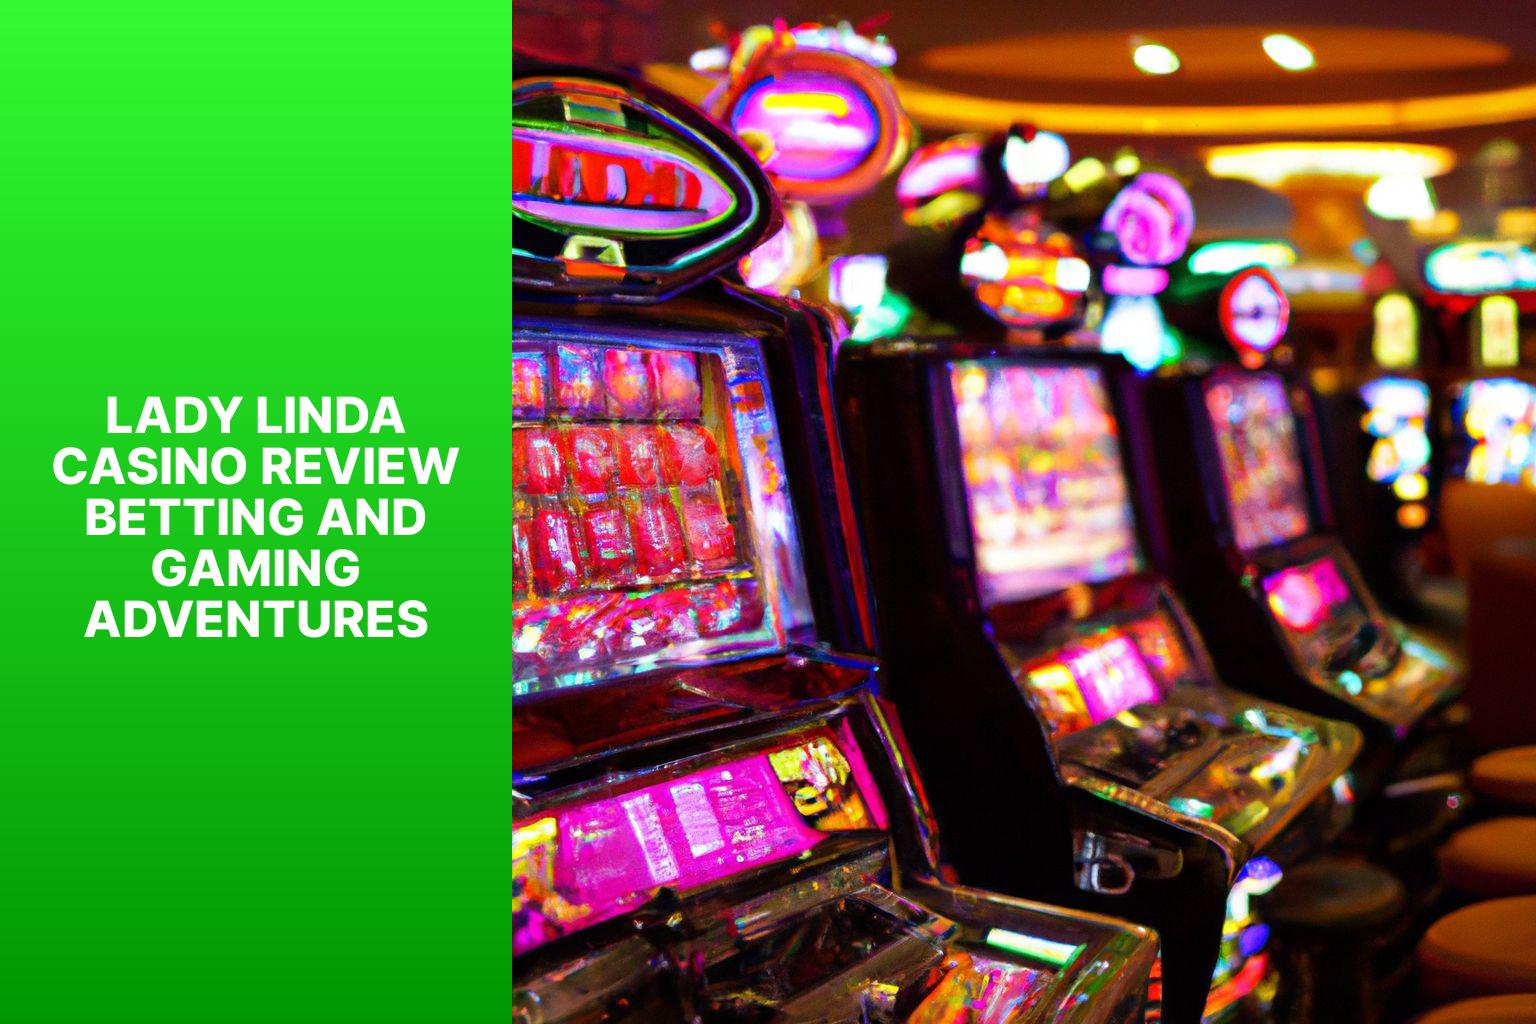 Lady Linda Casino Review Betting and Gaming Adventures